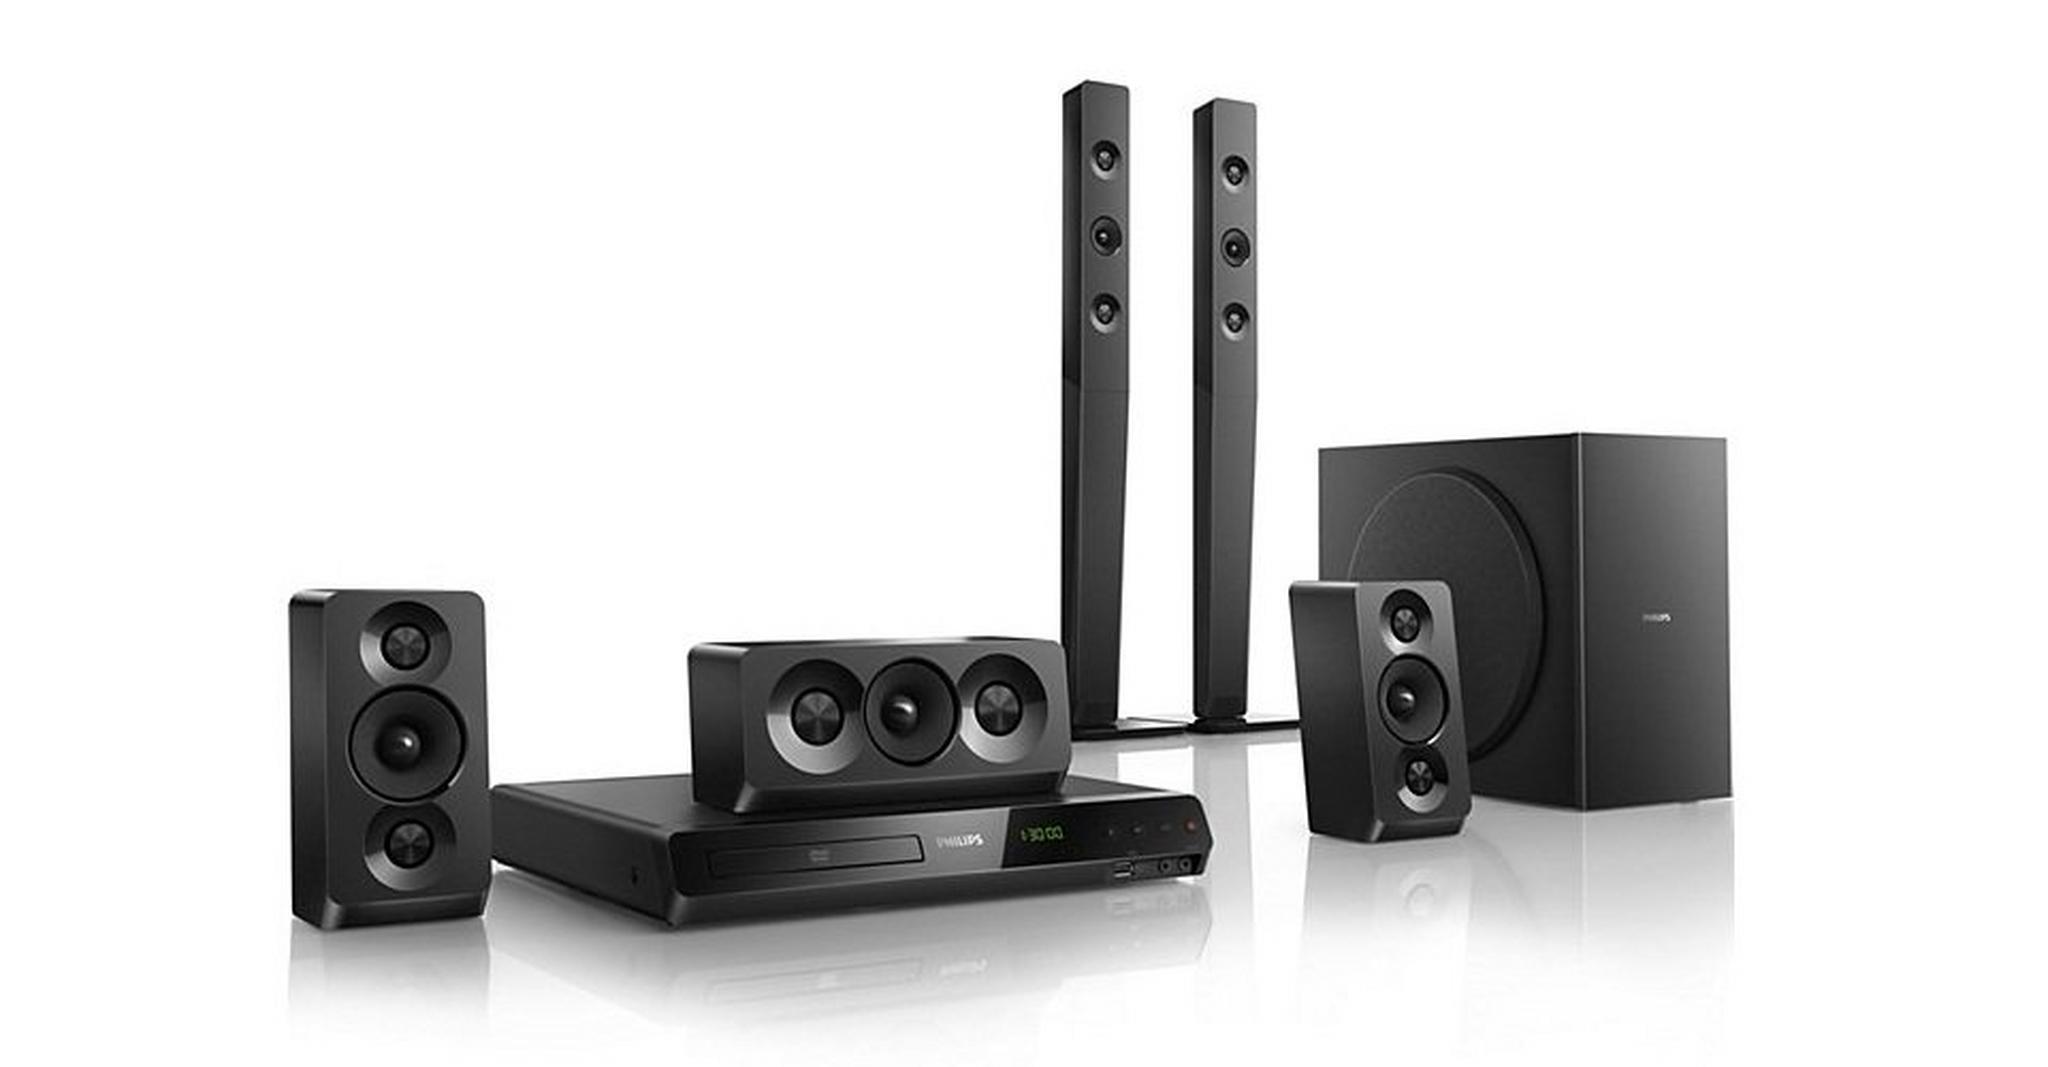 Philips DVD Home Theater System 5.1 Channel 1000W - HTD5550/98